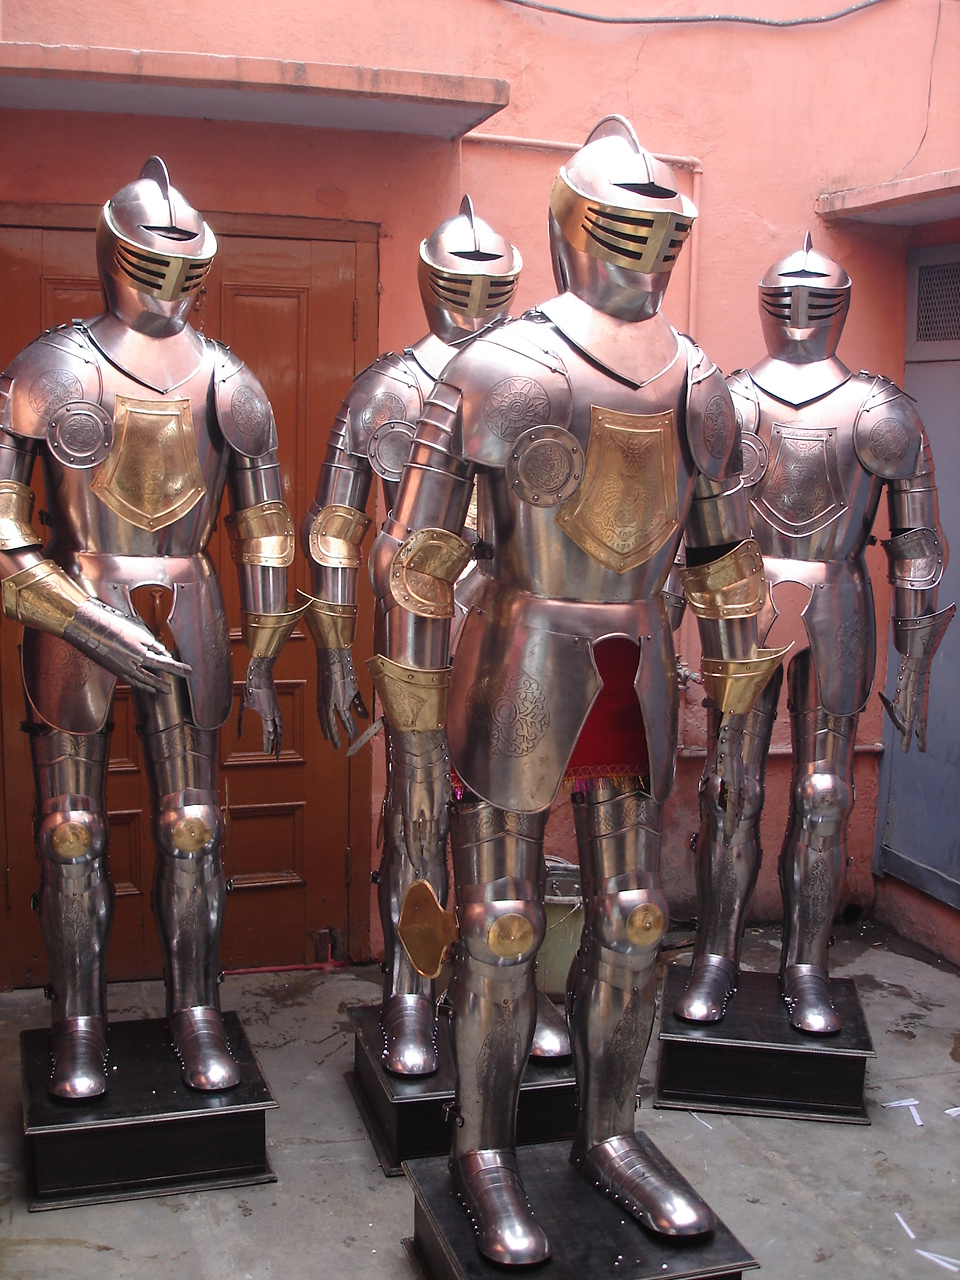 medieval armor, suits of armor, armor suit, knight suit of armor